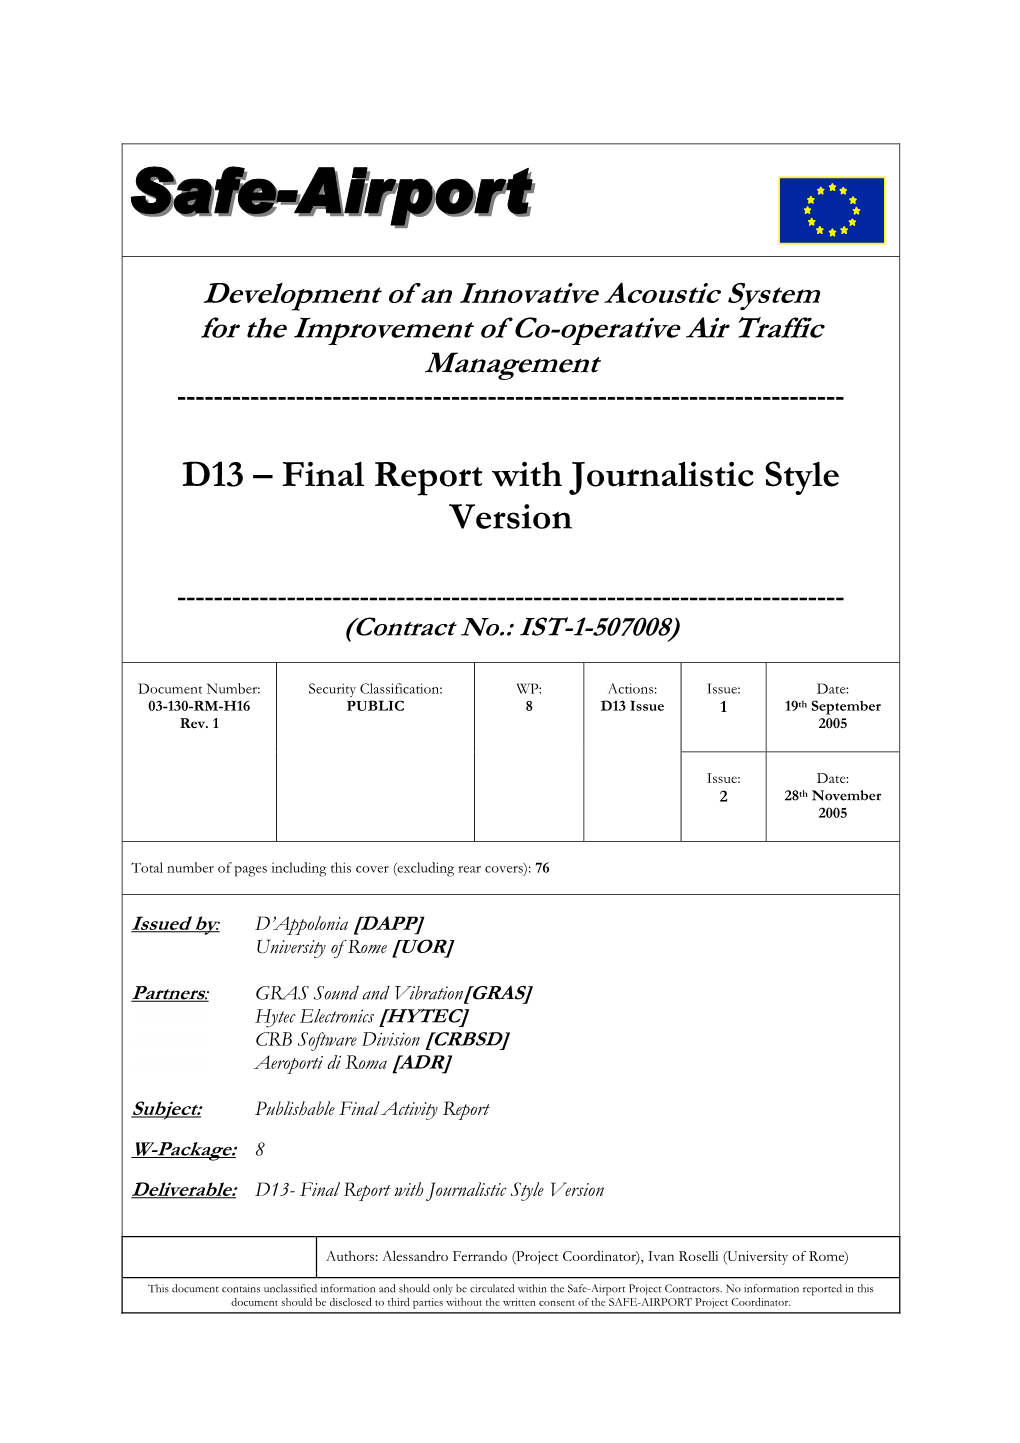 D13 – Final Report with Journalistic Style Version